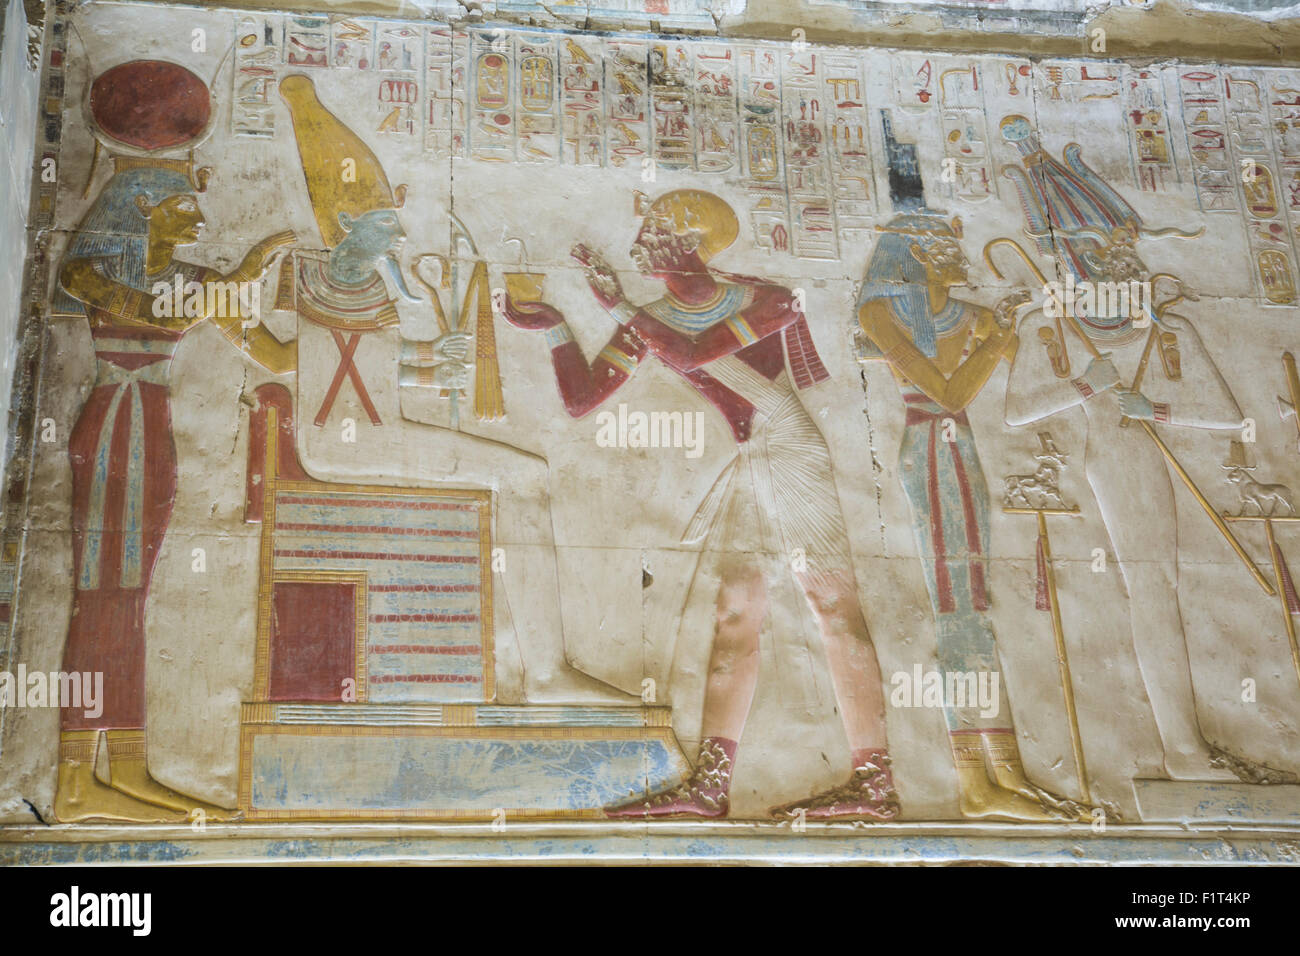 Pharaoh Seti I in center making an offering to the seated God Osiris, Temple of Seti I, Abydos, Egypt, North Africa, Africa Stock Photo